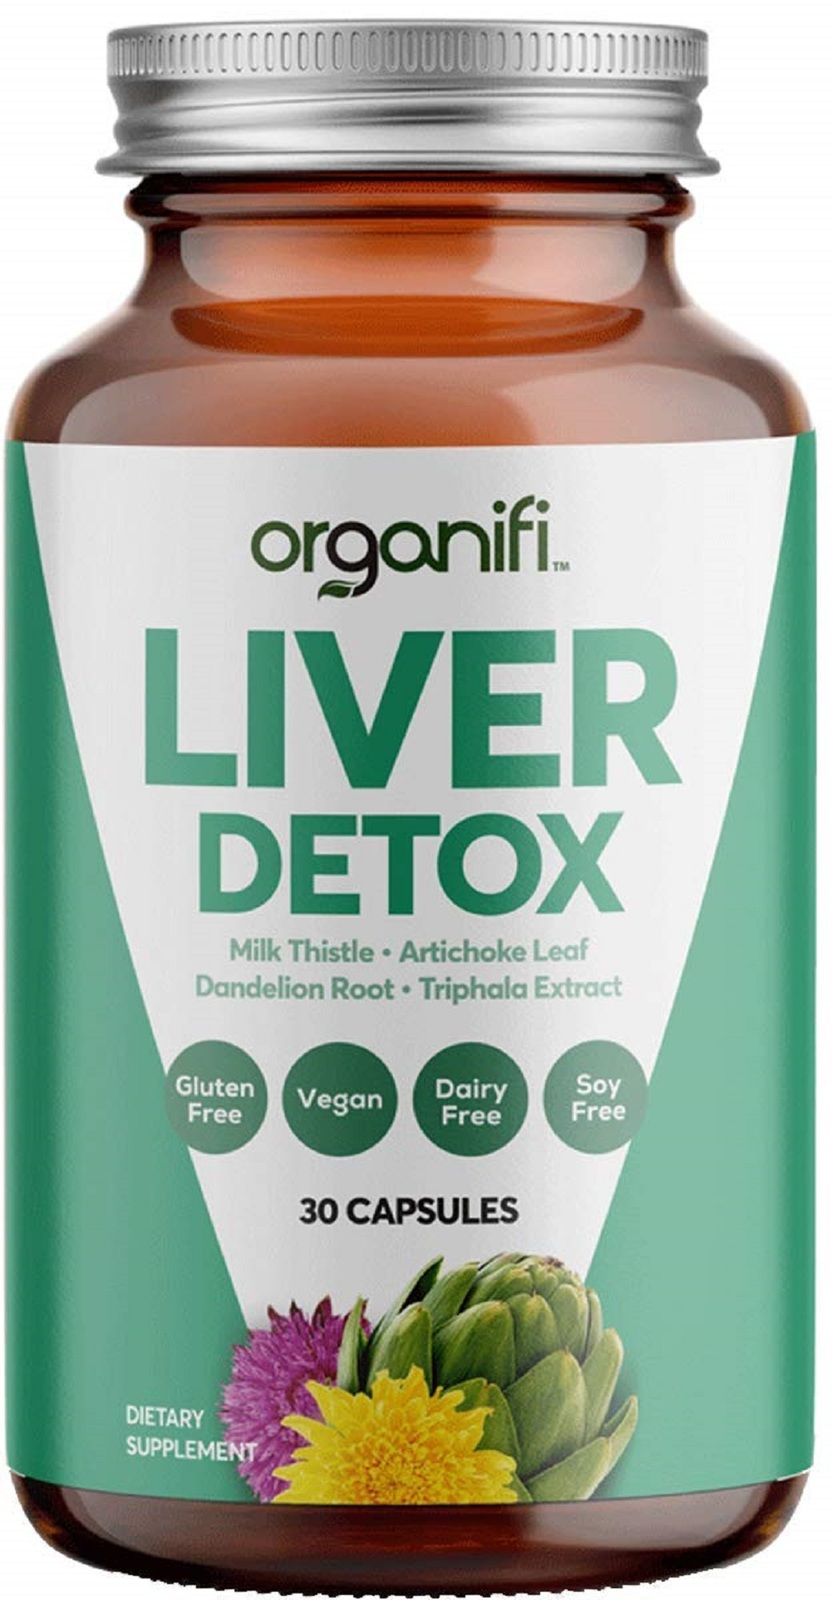 Organifi: Liver Detox - Herbal Liver Detox and Support - 30 Day Supply